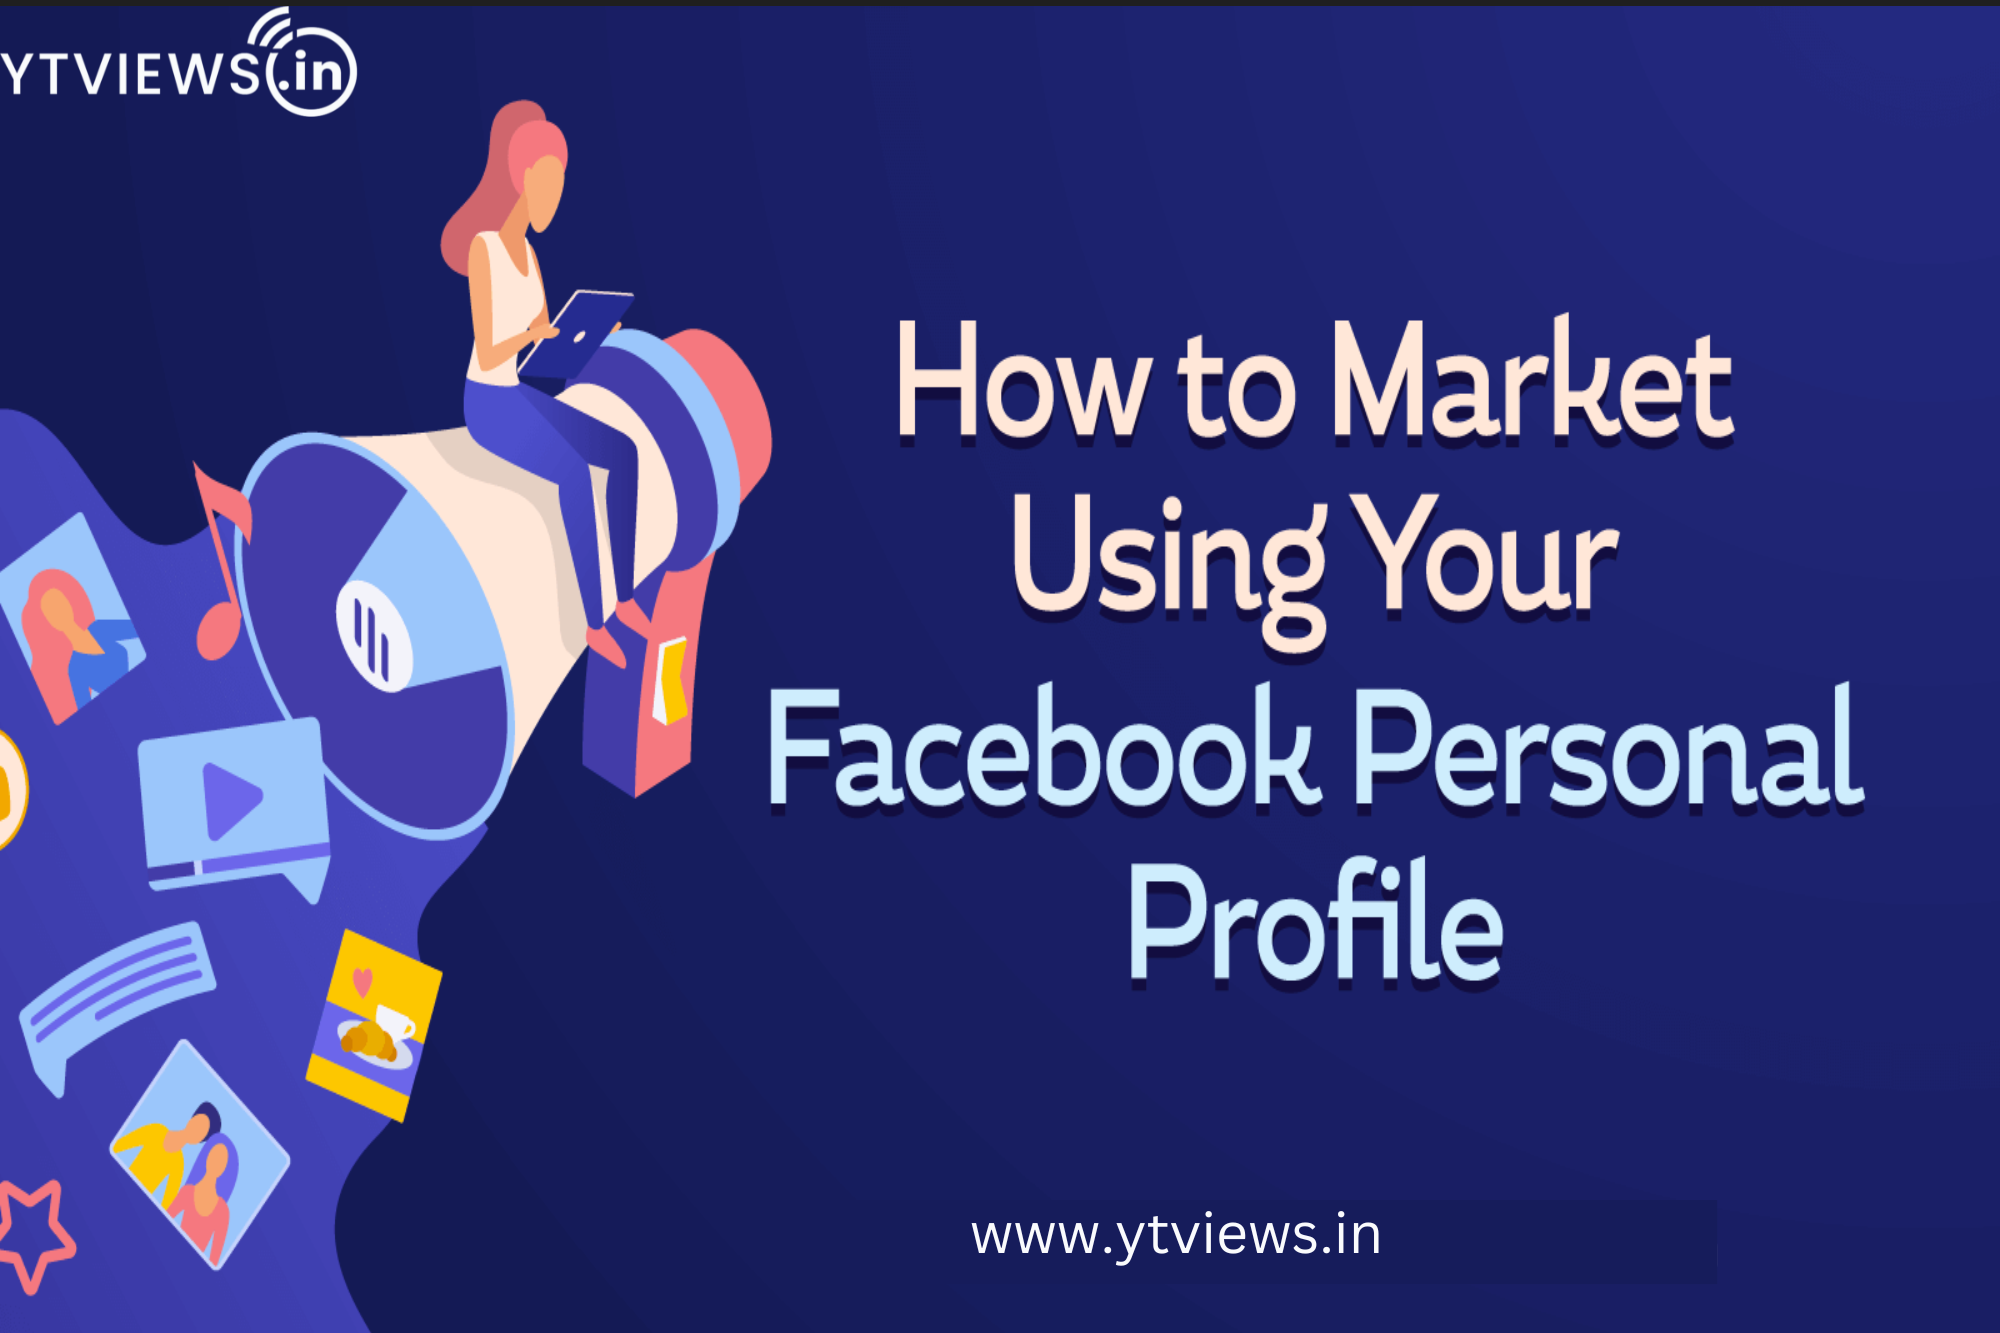 How to market using your Facebook personal profile